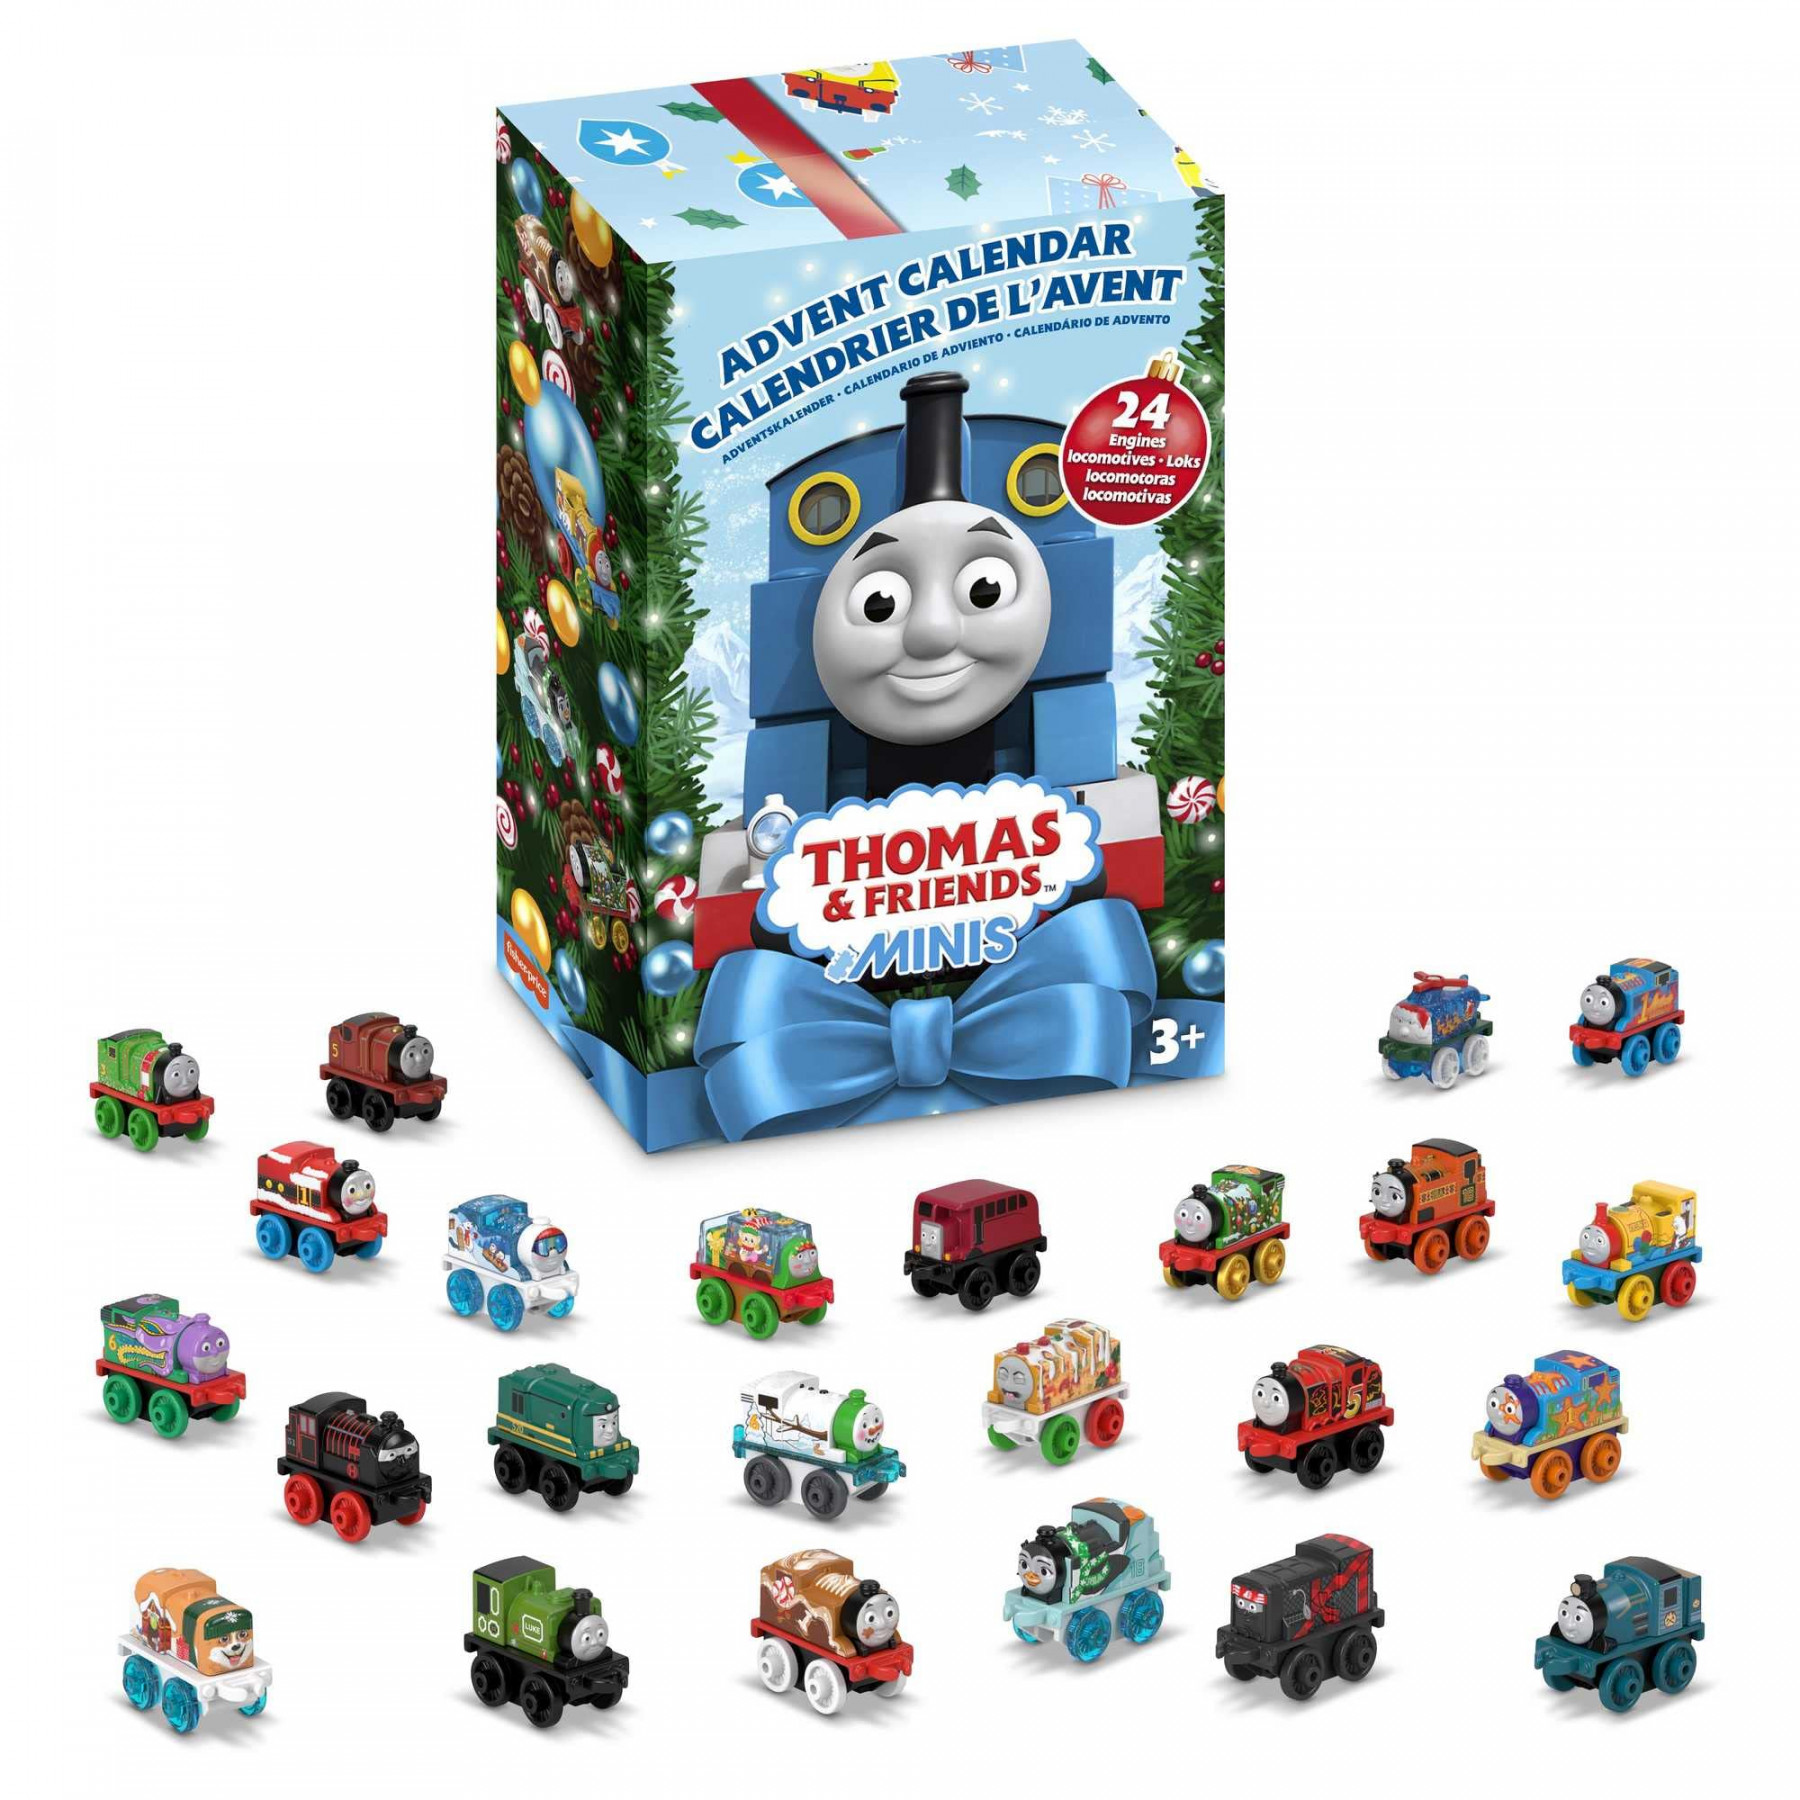 Thomas & Friends MINIS Advent Calendar , Christmas gift,  miniature  toy trains and vehicles for preschool kids ages  years and up